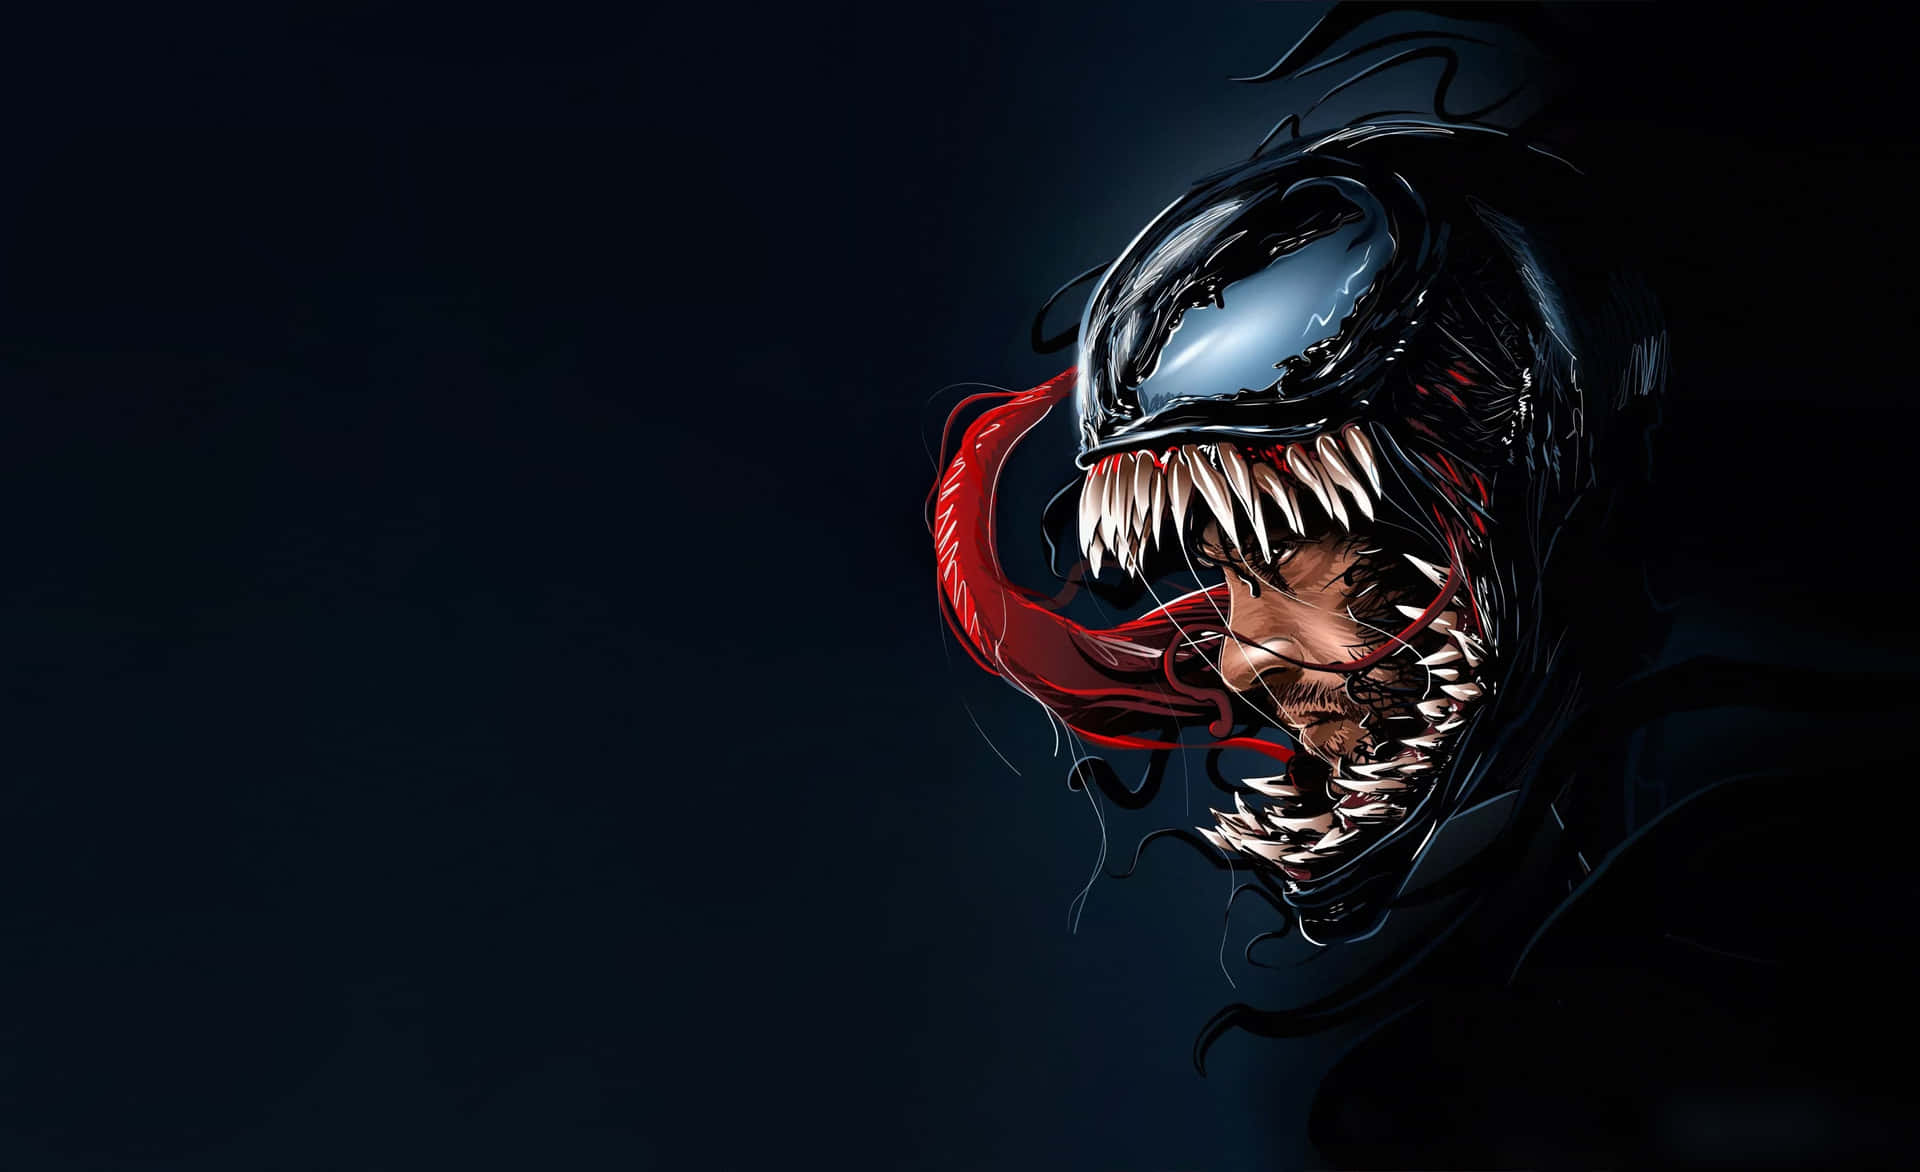 "Become Unstoppable with Venom"